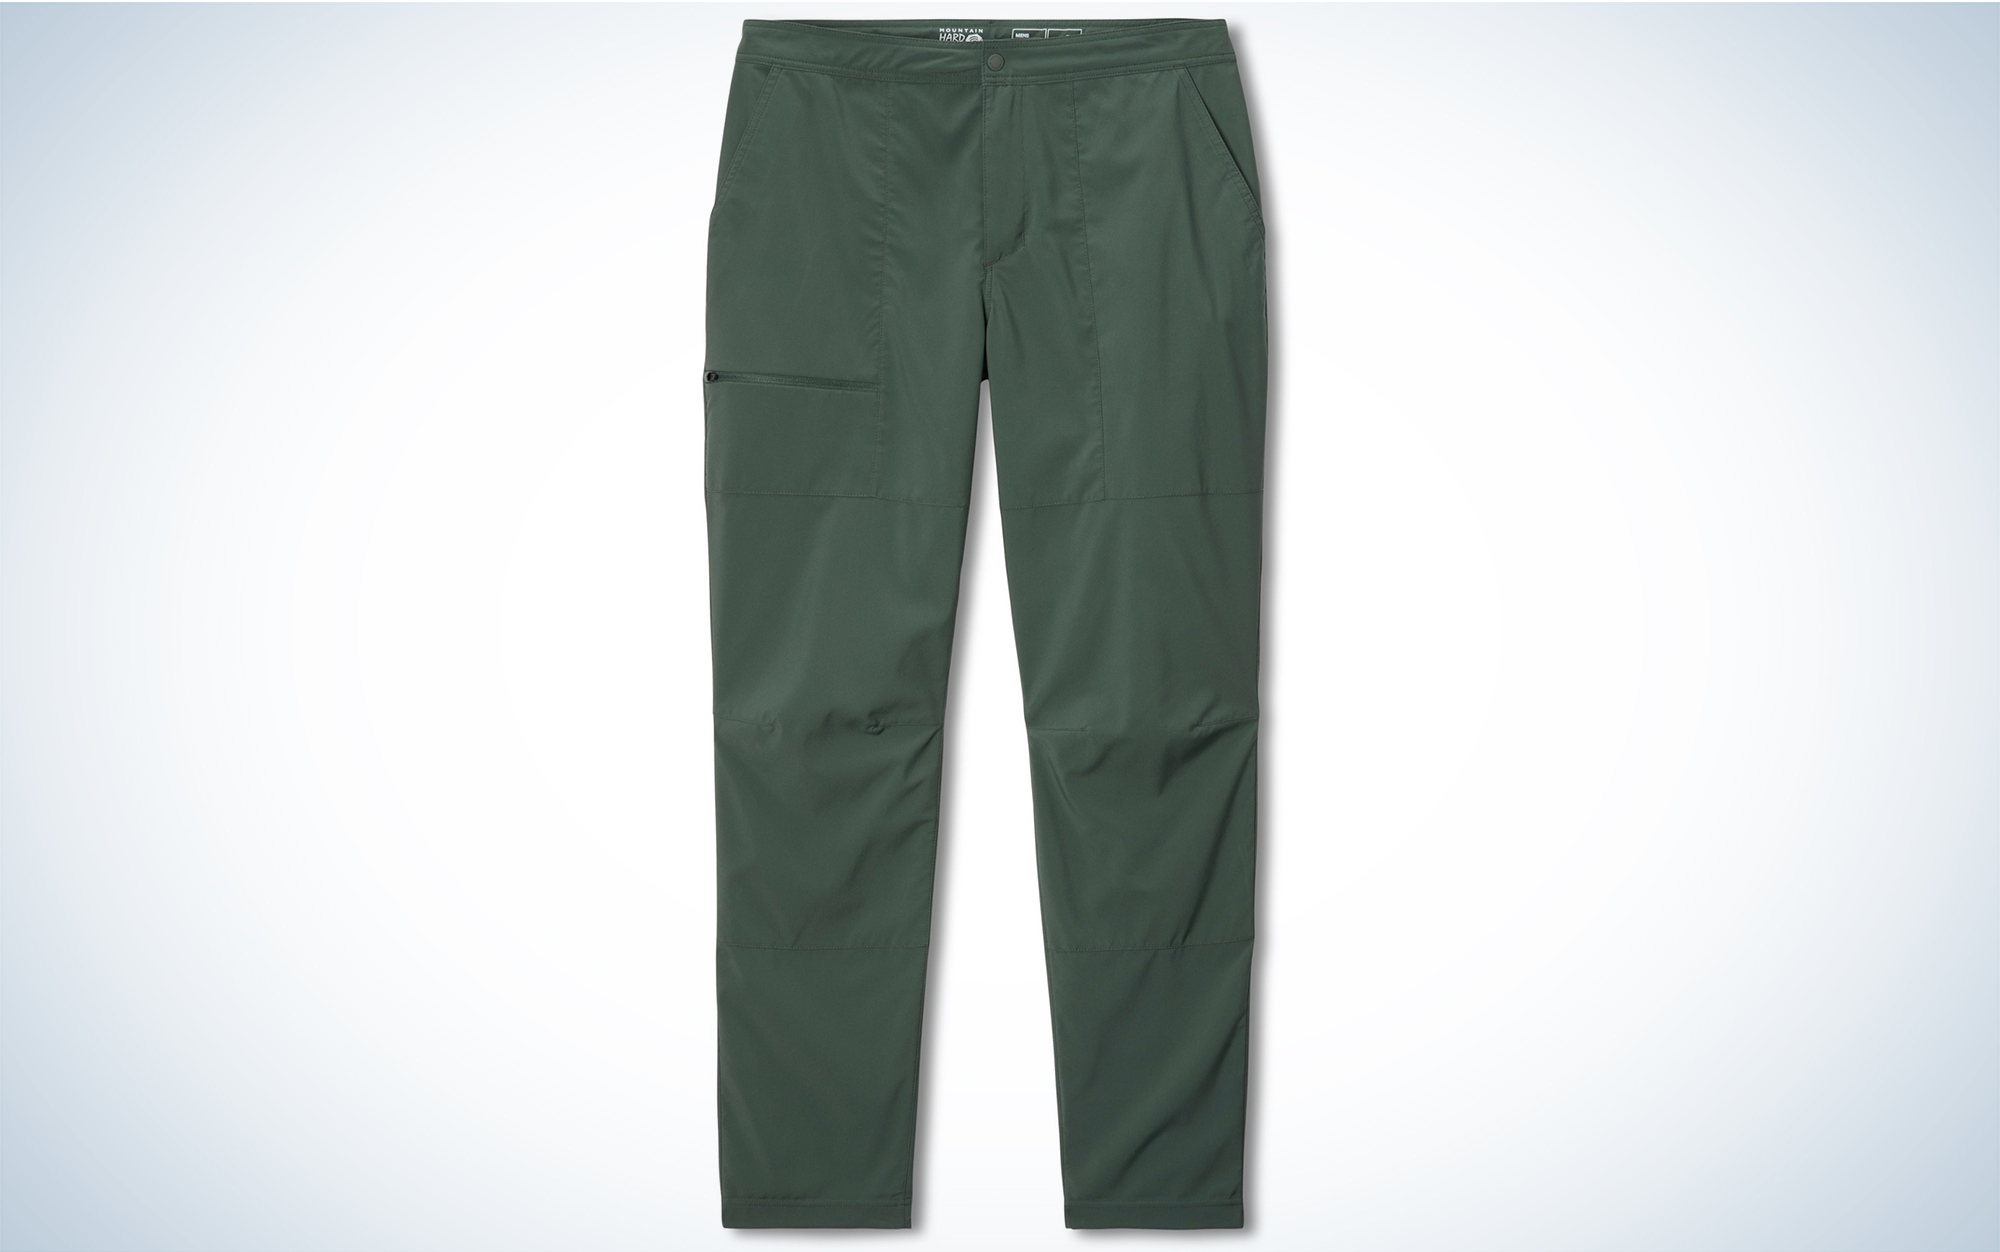 The Mountain Hardwear Trail Senders are the best lightweight hiking pants.